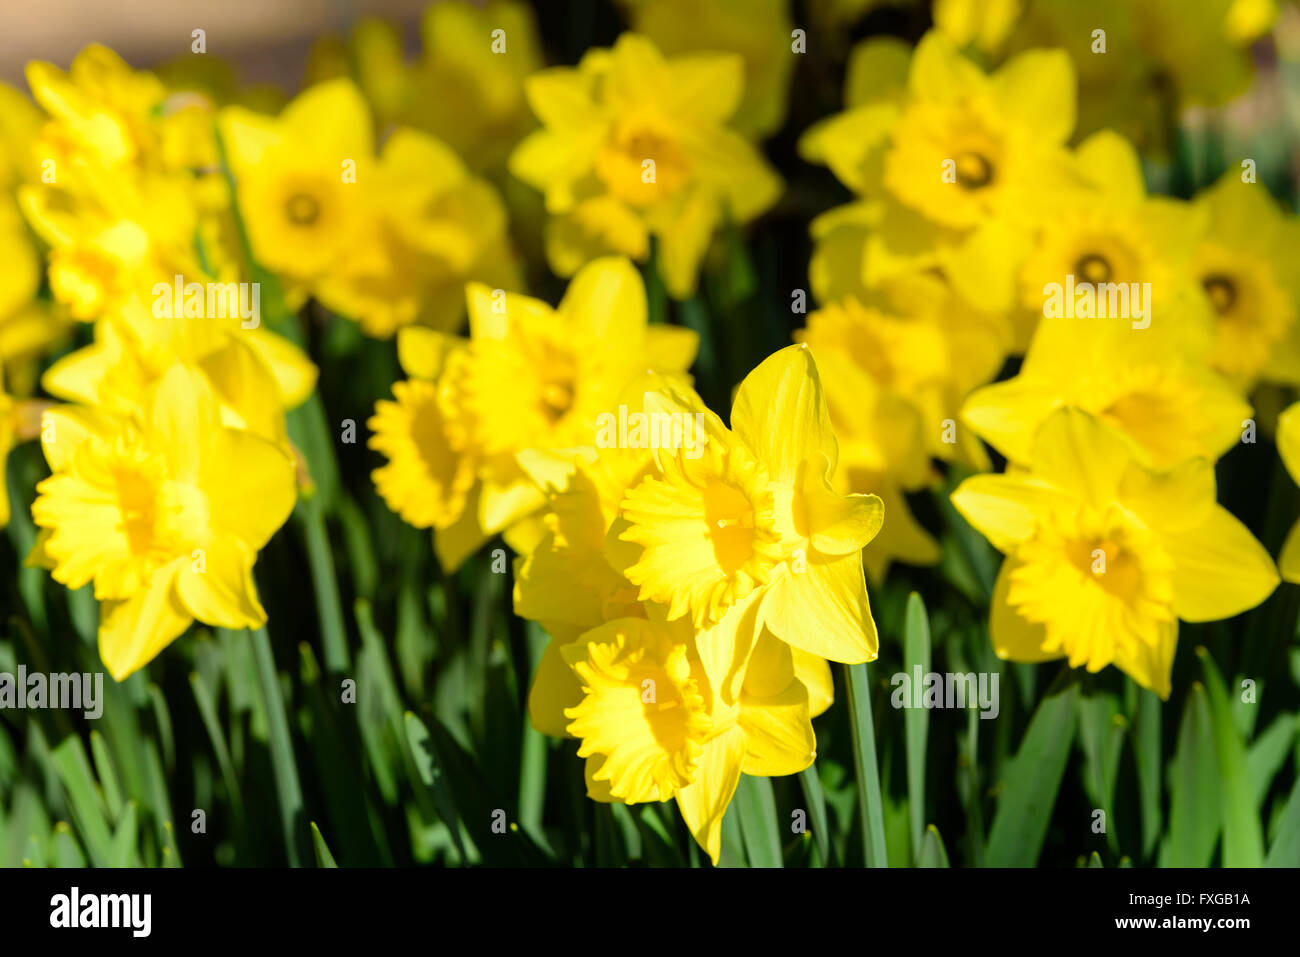 Narcissus pseudonarcissus commonly known as wild daffodil or Lent lily. Here the variety Golden Harvest. Stock Photo